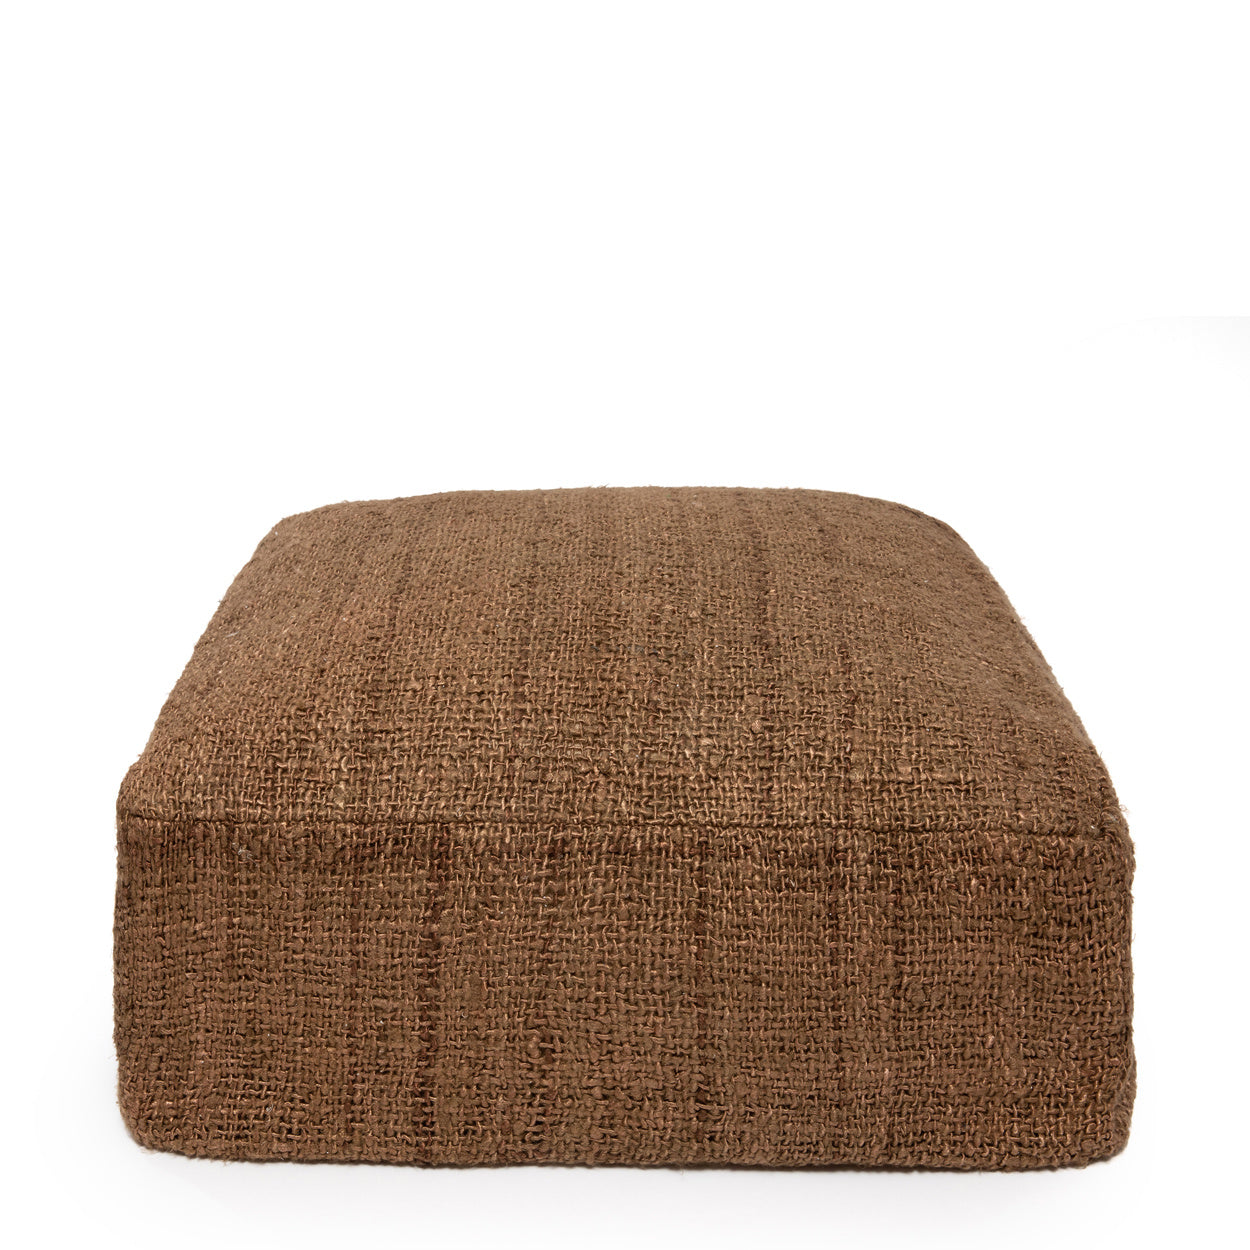 THE OH MY GEE Pouffe brown front view